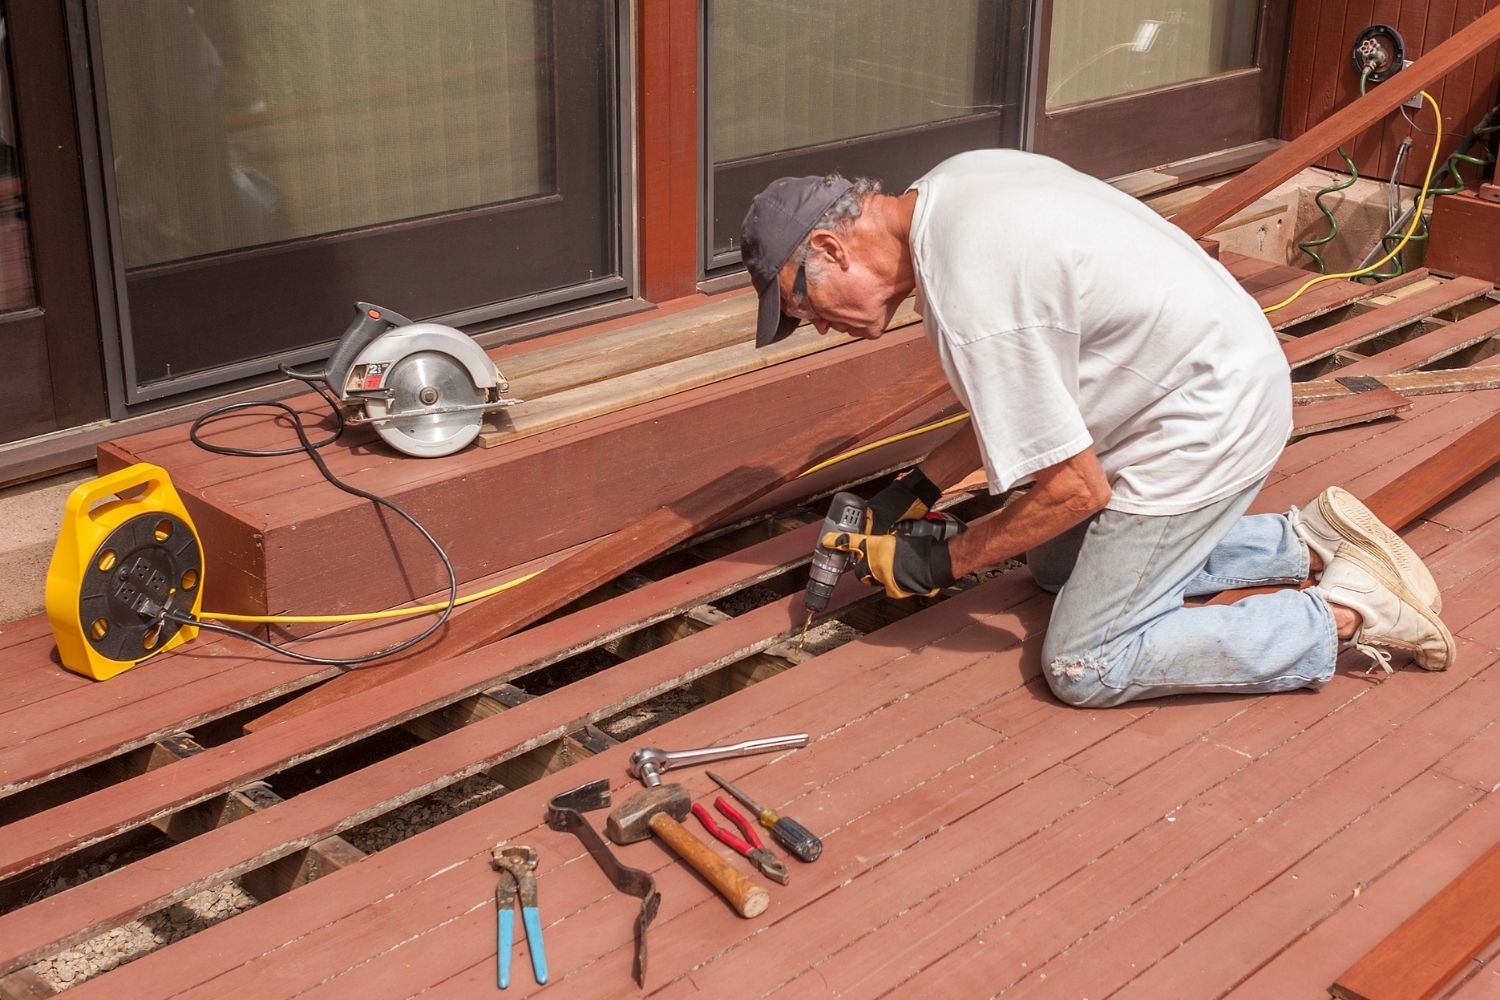 A worker used a power tool to repair a deck.